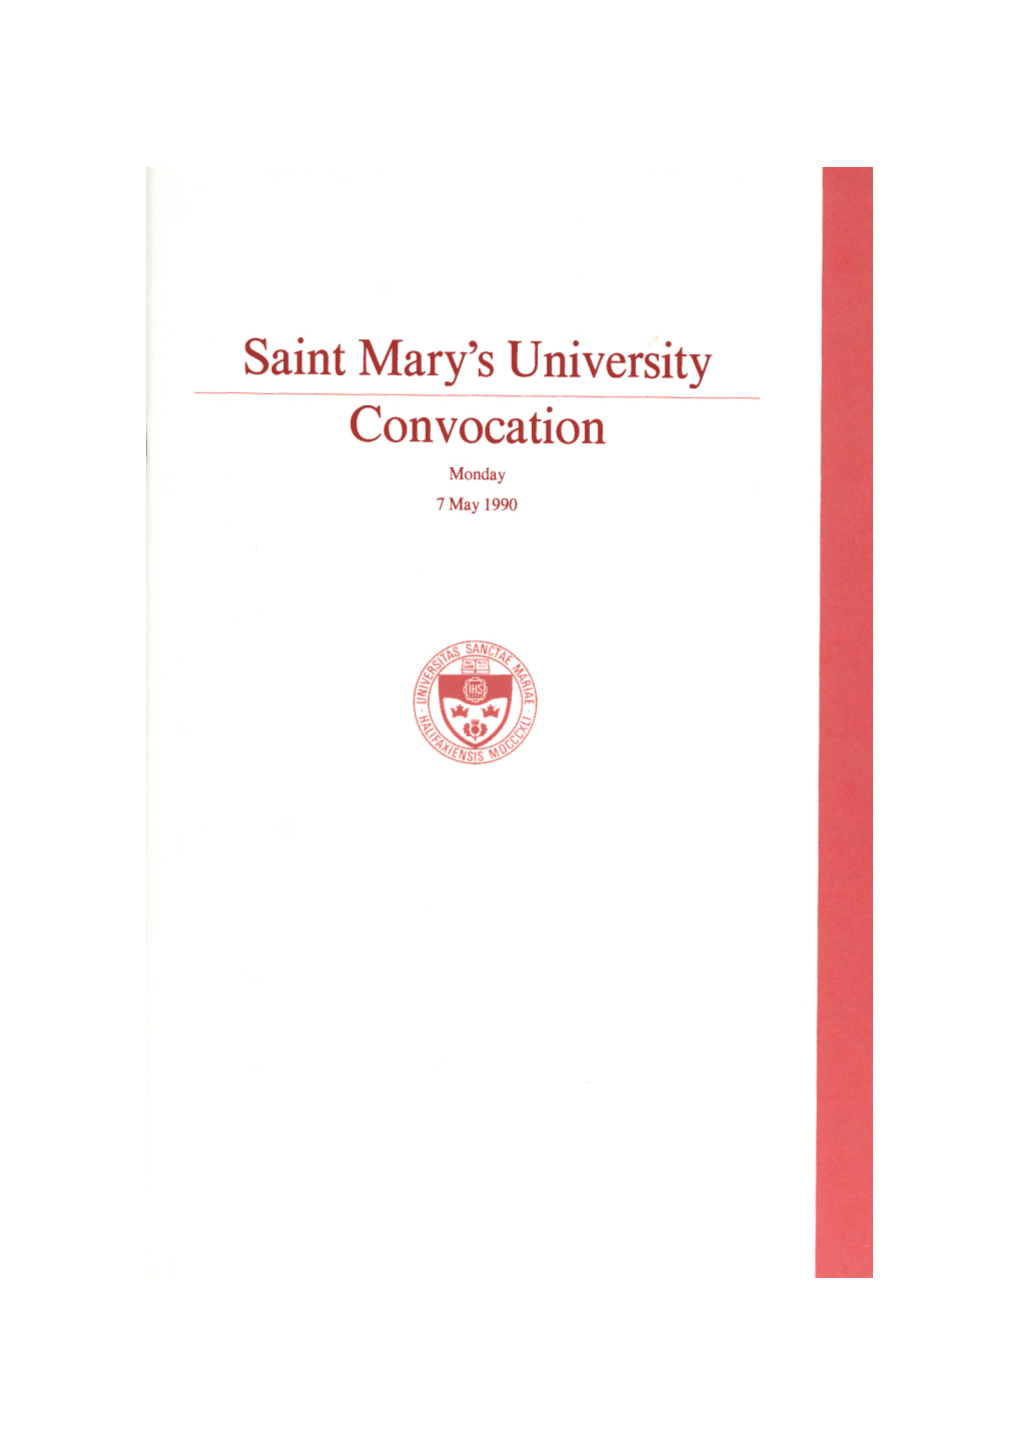 Saint Mary's University Convocation Monday 7 May 1990 Order of Academic Procession